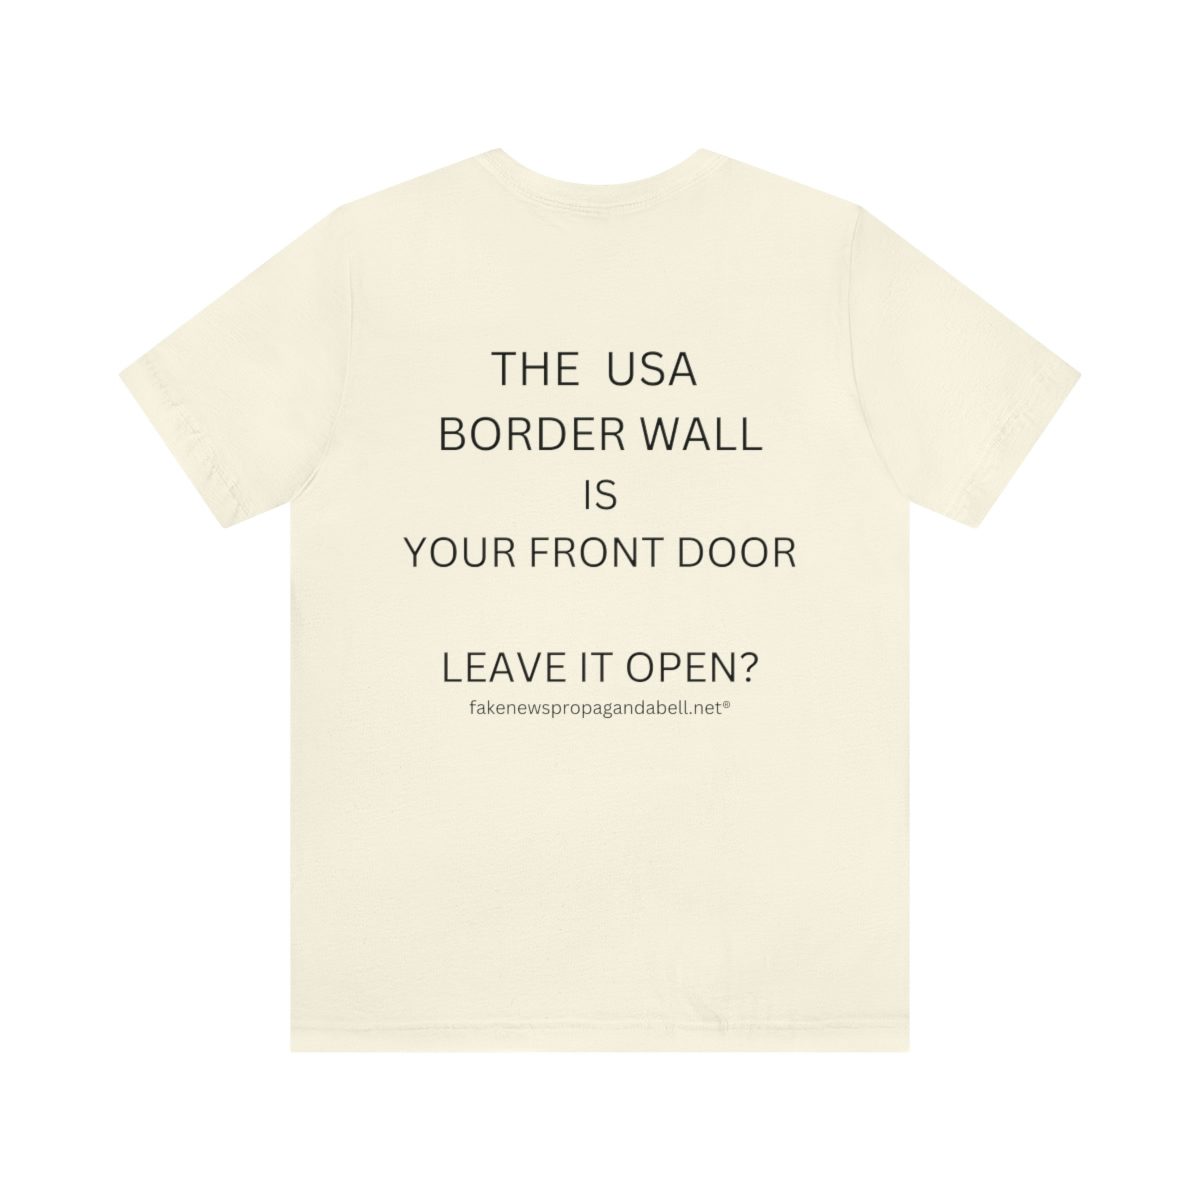 THE USA BORDER WALL IS YOUR FRONT DOOR